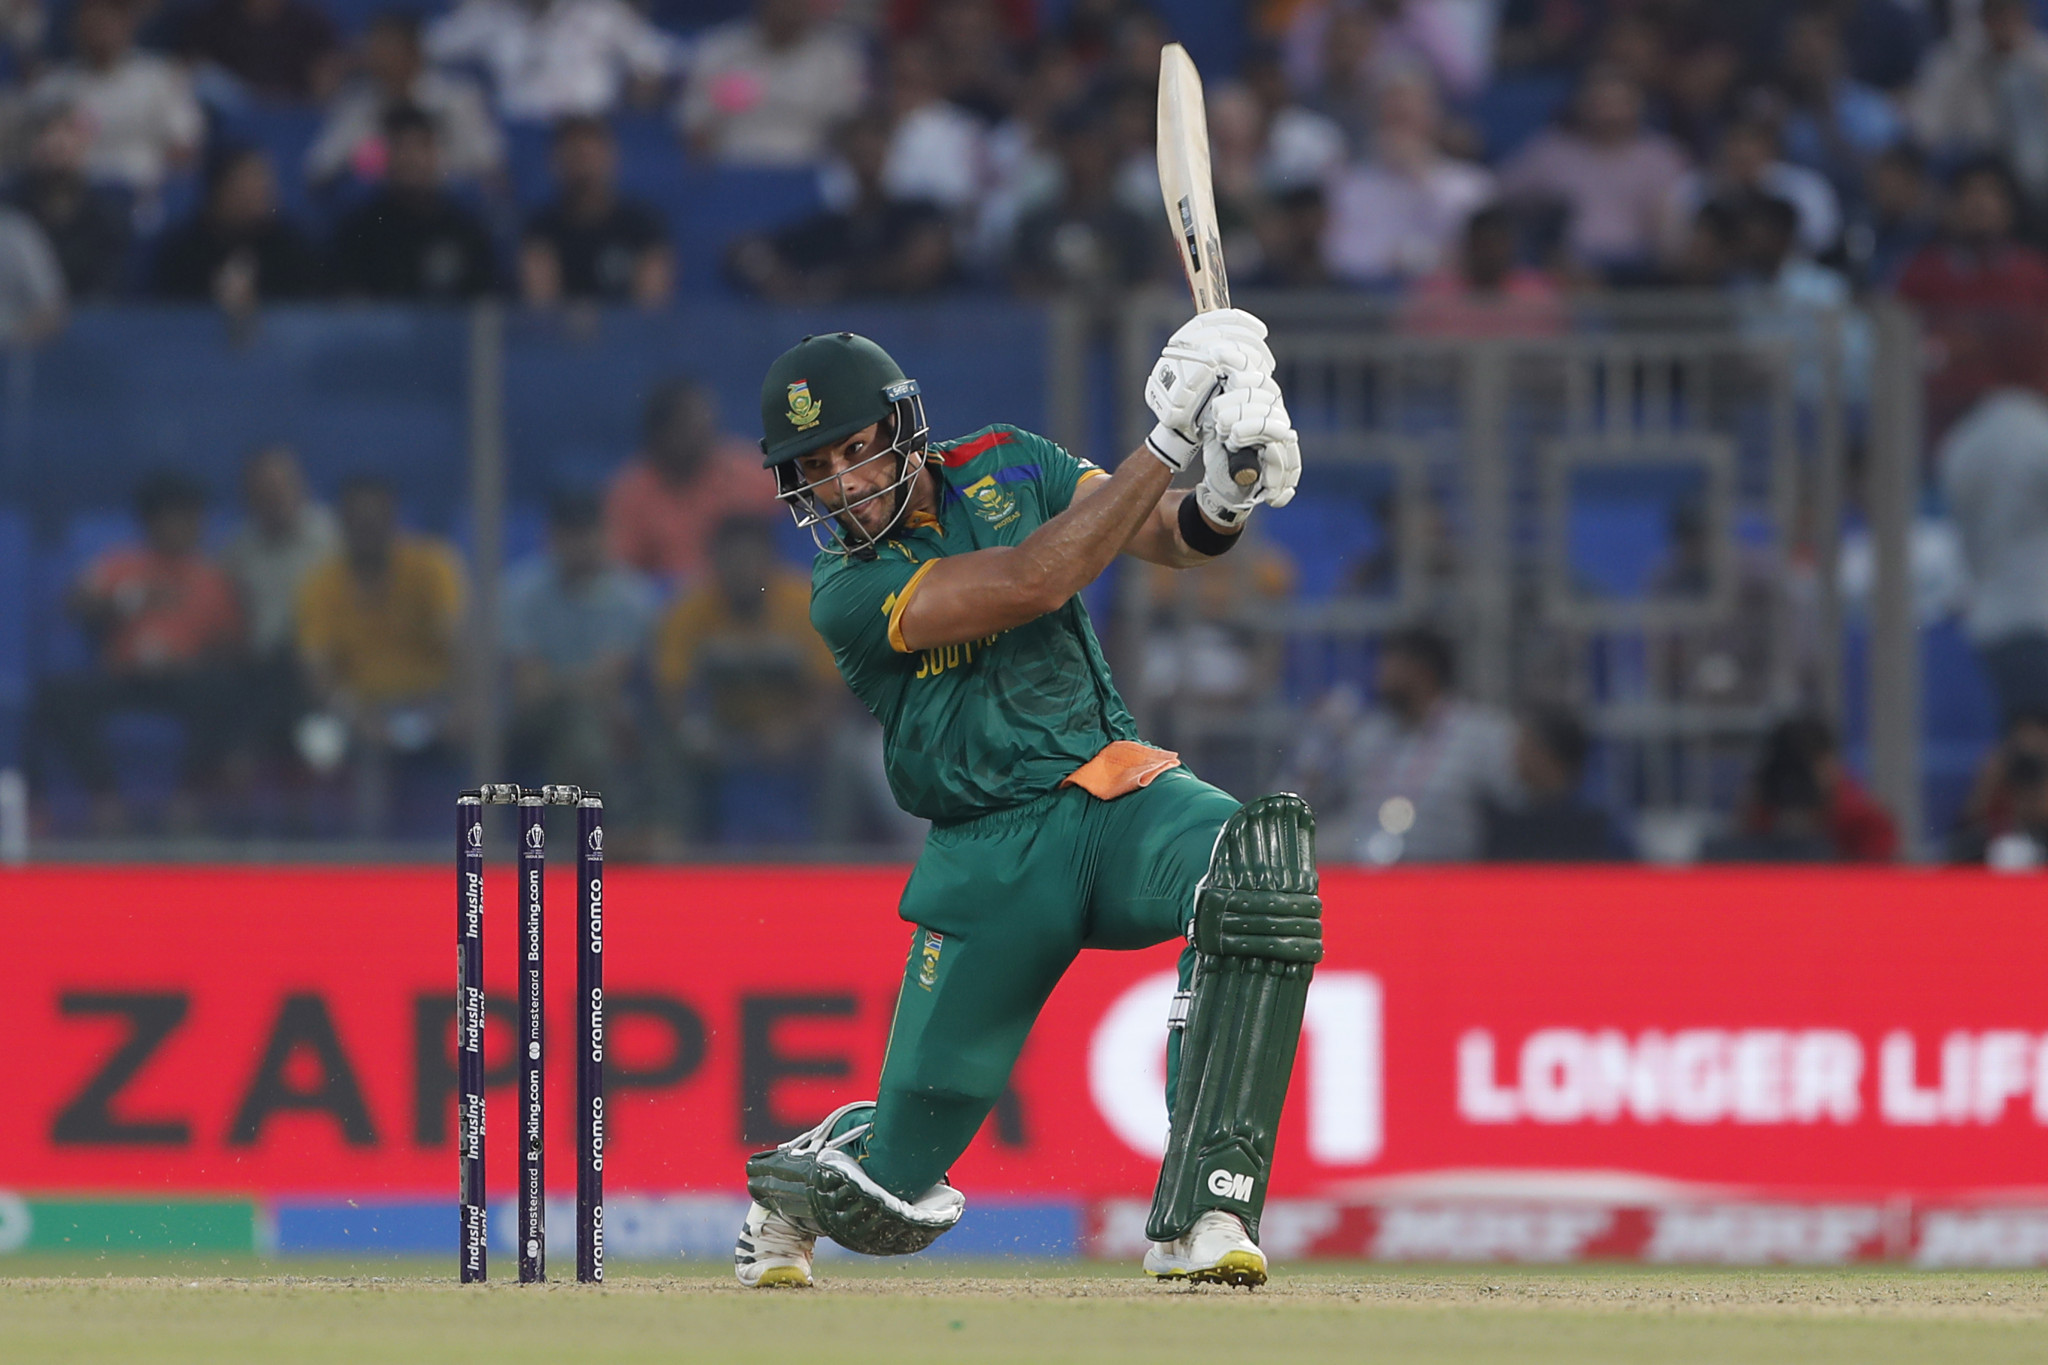 Aiden Markram scored the fastest ever Cricket World Cup century as South Africa beat Sri Lanka by 102 runs ©Getty Images